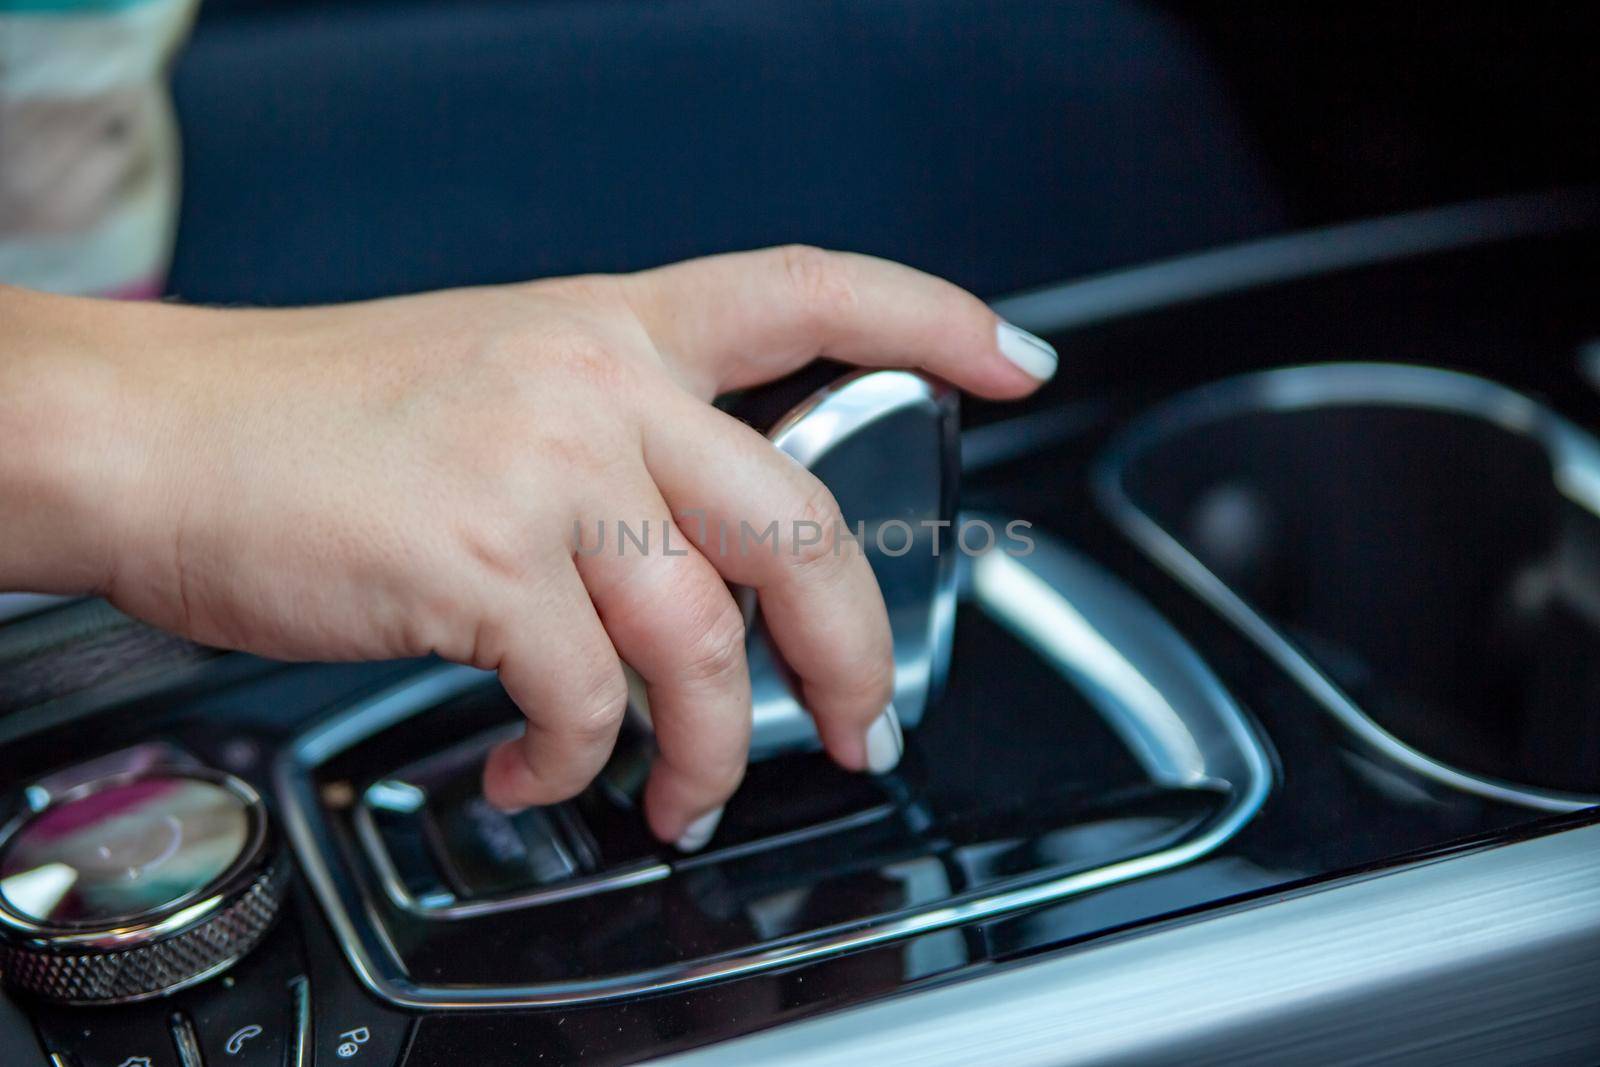 hand switches modes on the automatic transmission lever. close-up. no face. Driver woman hand holding automatic transmission or variable speed drive in car, shifting gear stick before driving car.